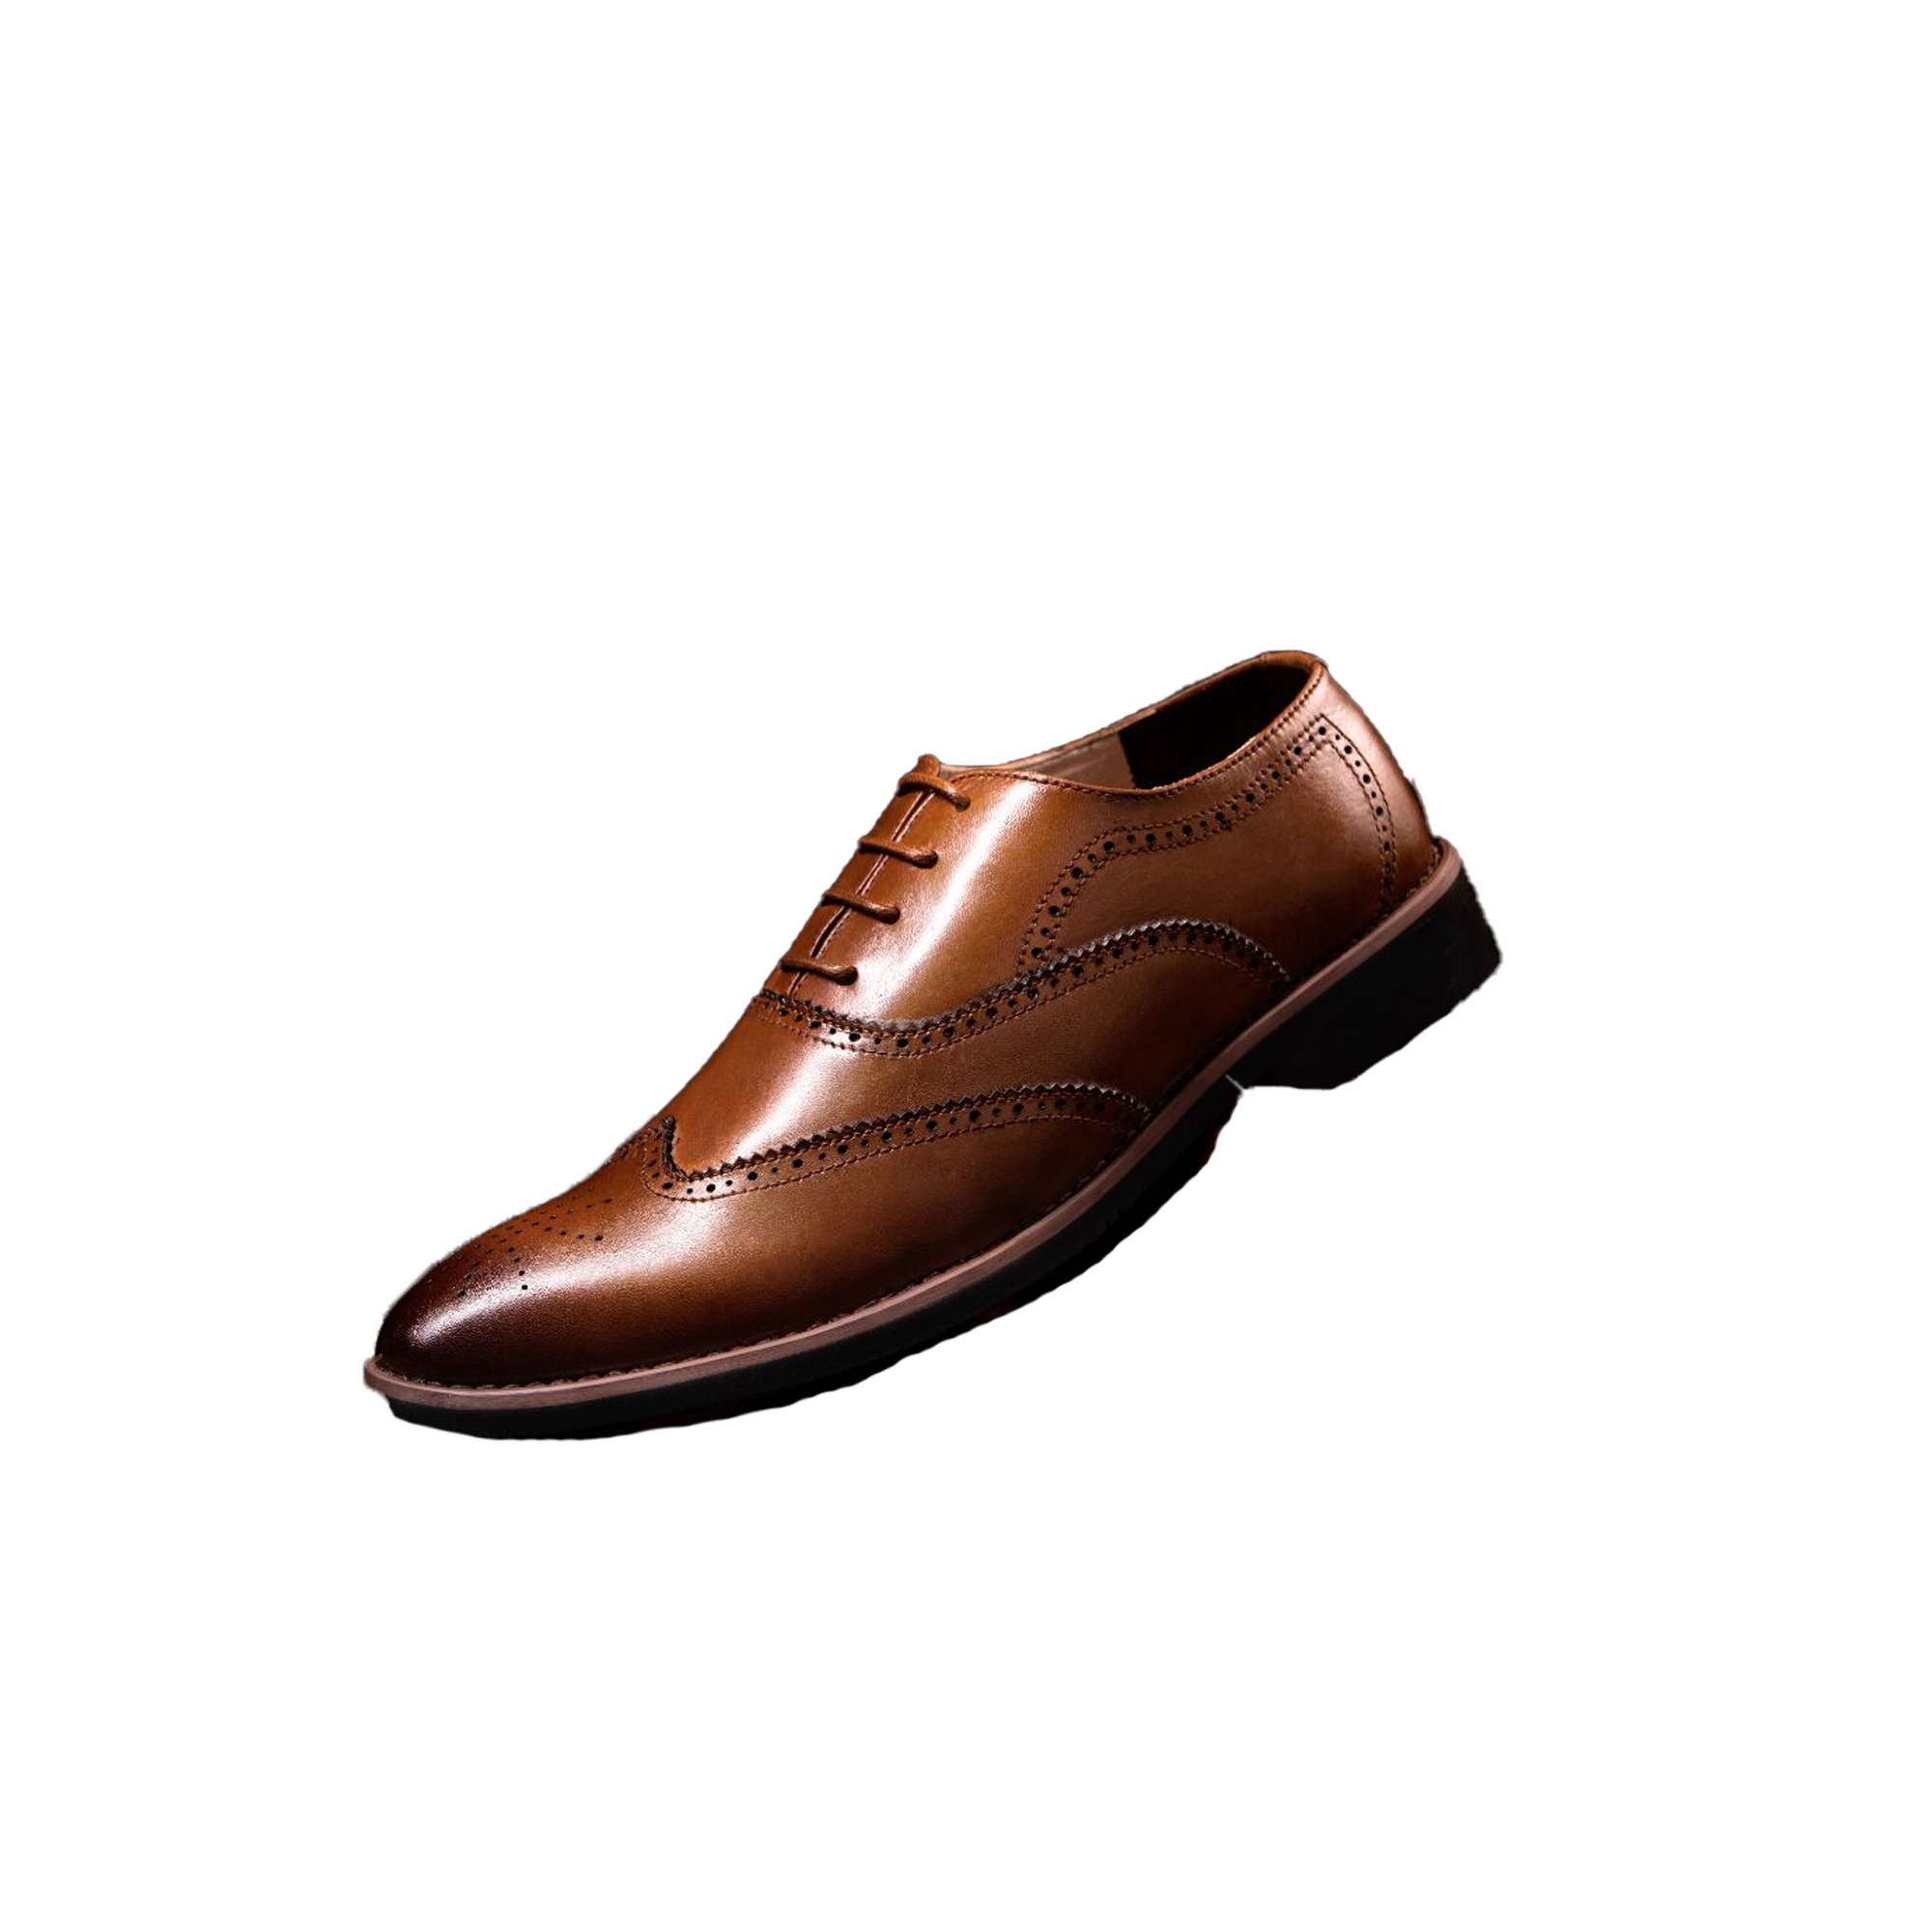  Tan Brogue Leather Shoes - Republic Leather 